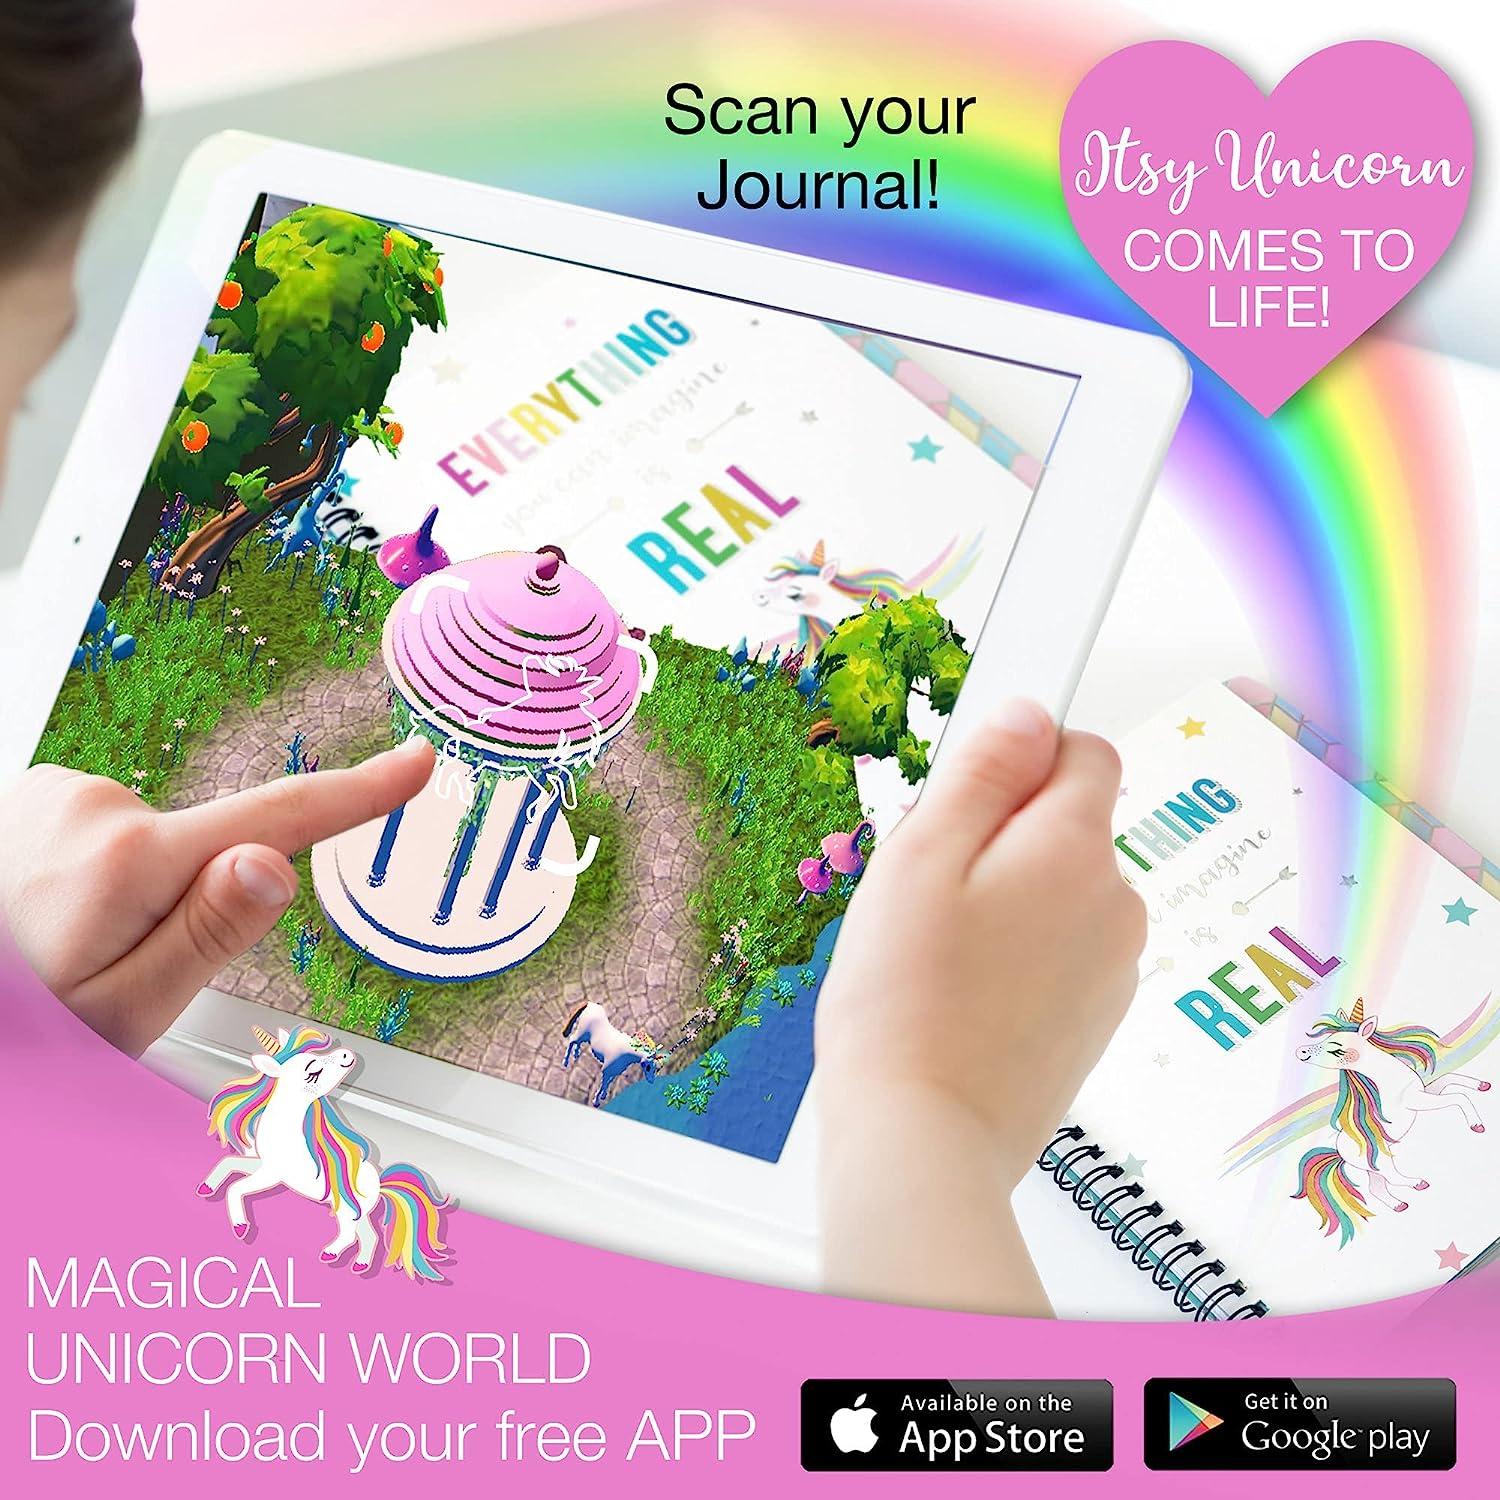 Unicorn Stationery Set for Kids - Unicorn Gifts for Girls Ages 6, 7, 8, 9,  10-12 Year Old Age - Stationary Letter Writing Art Kit - Best Girl Birthday